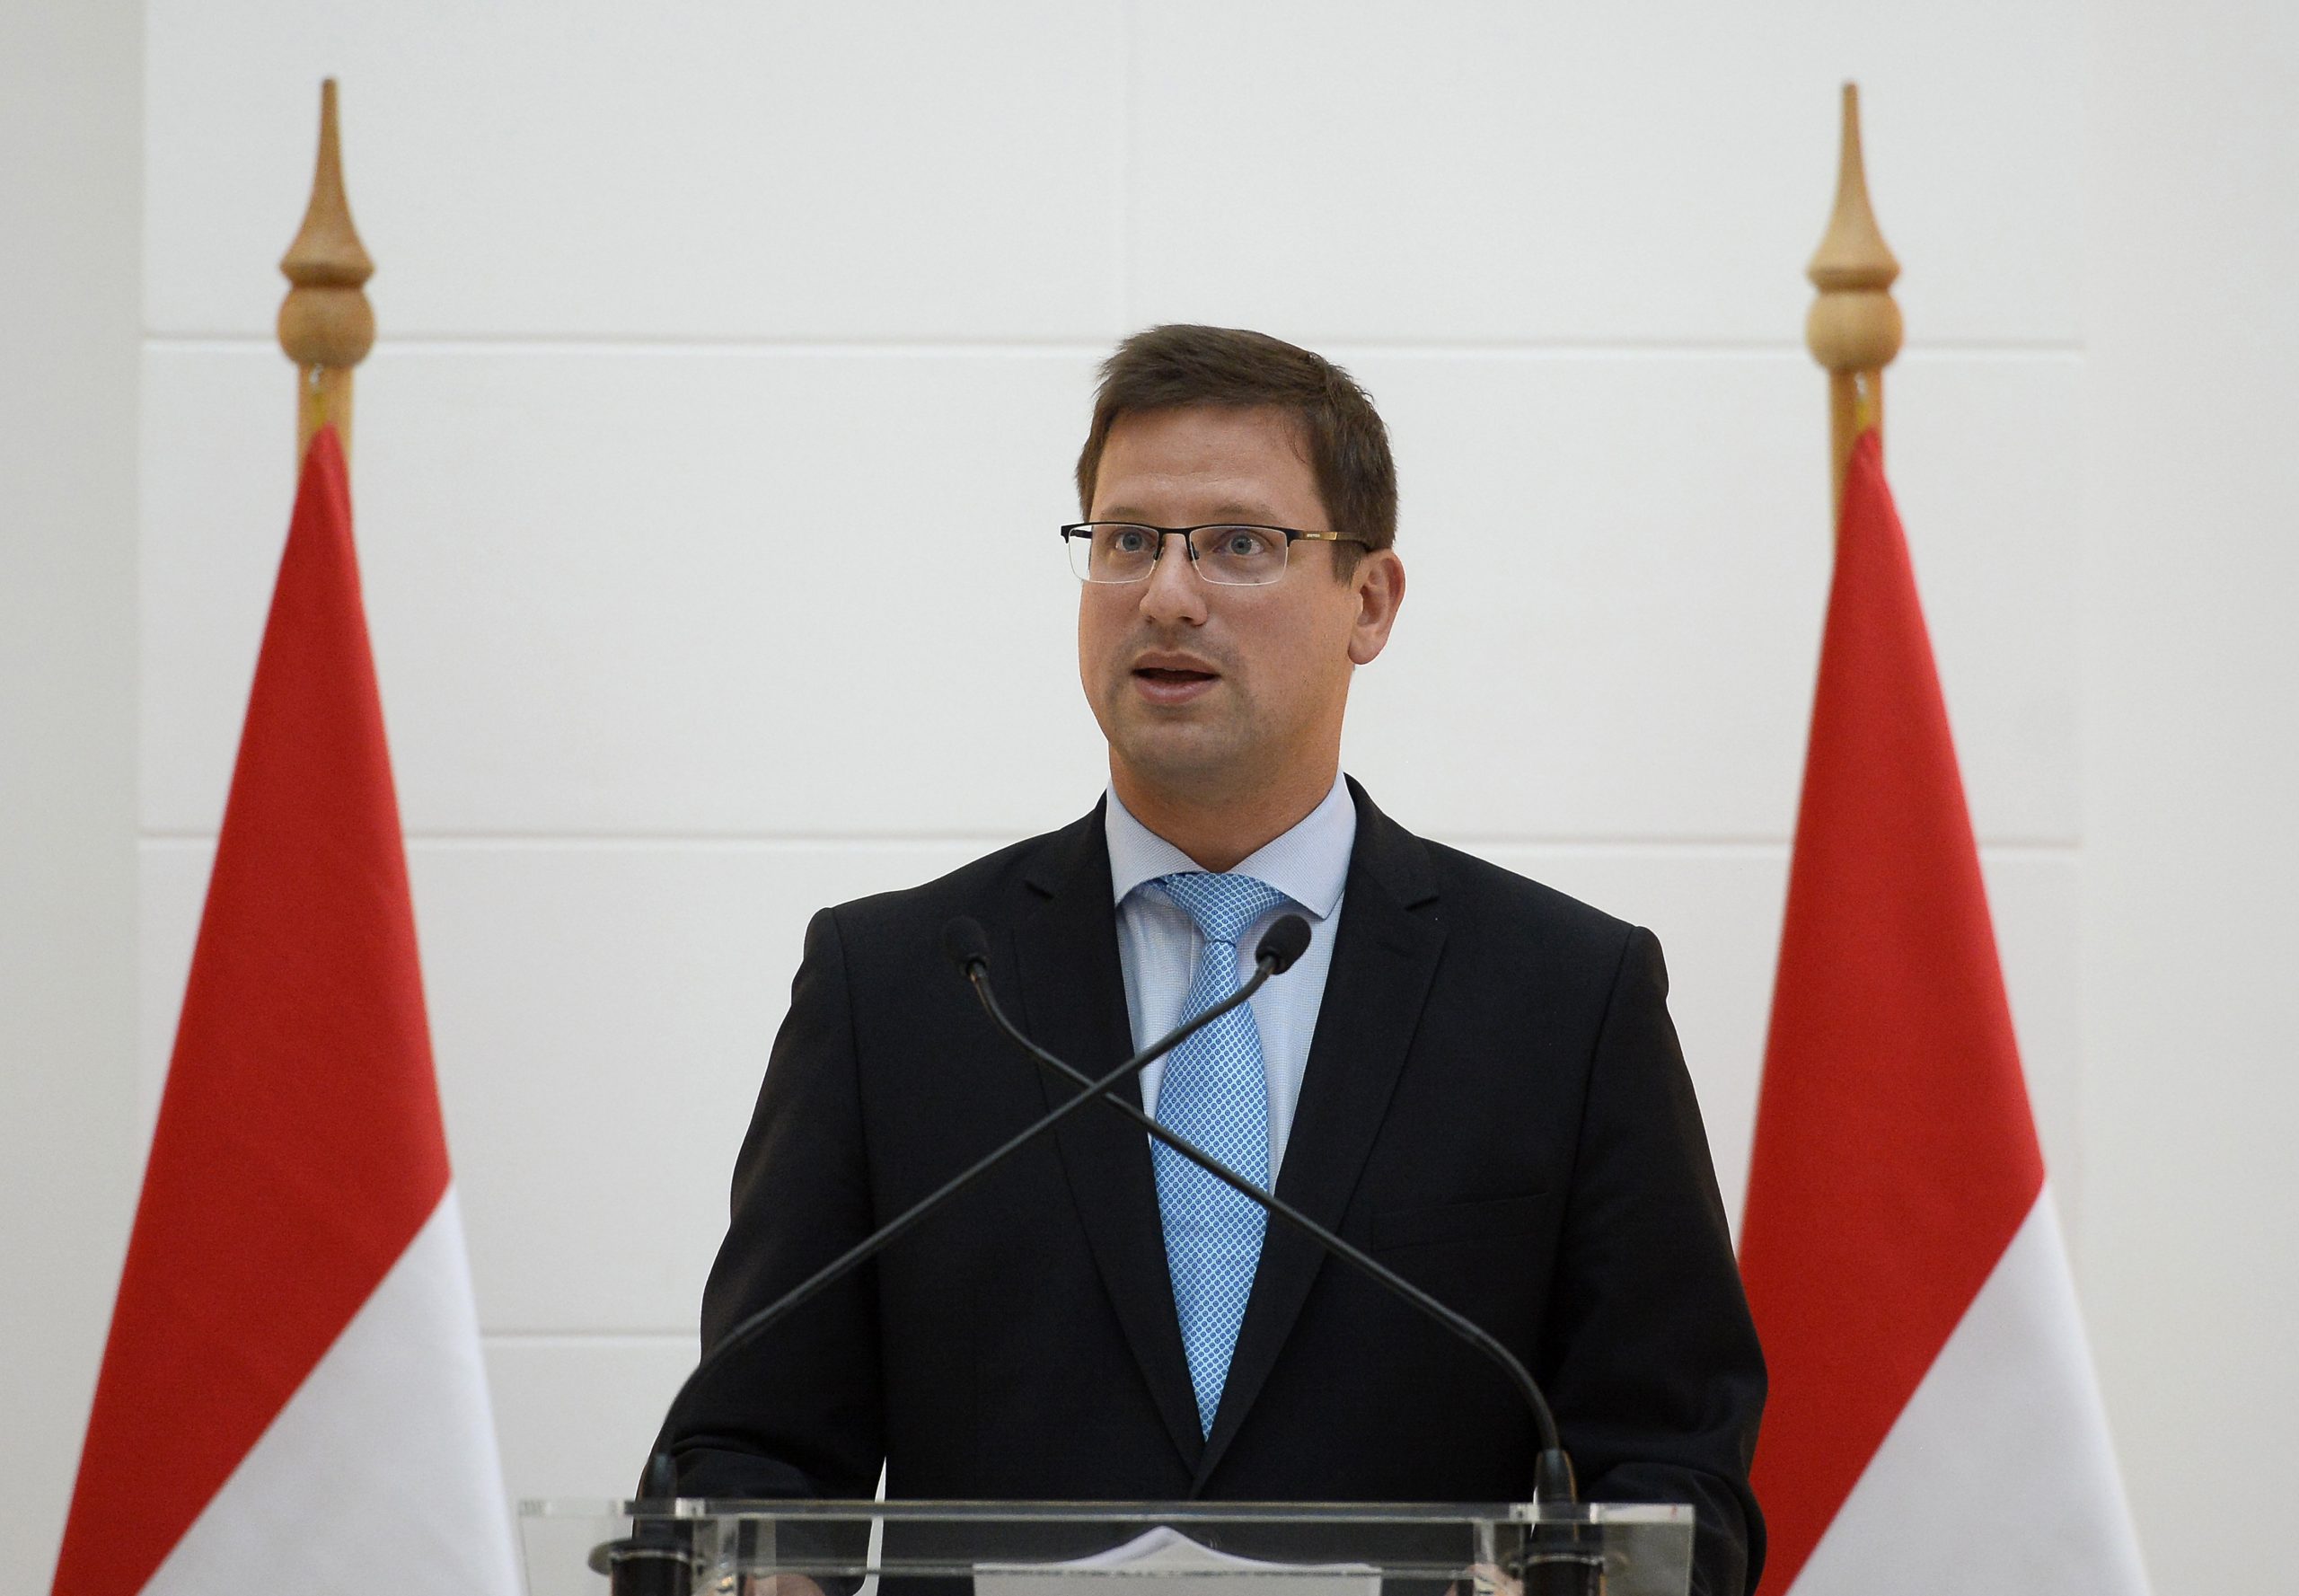 PMO Head: Hungarian-Bavarian Relations Rise Above Day-to-Day Differences